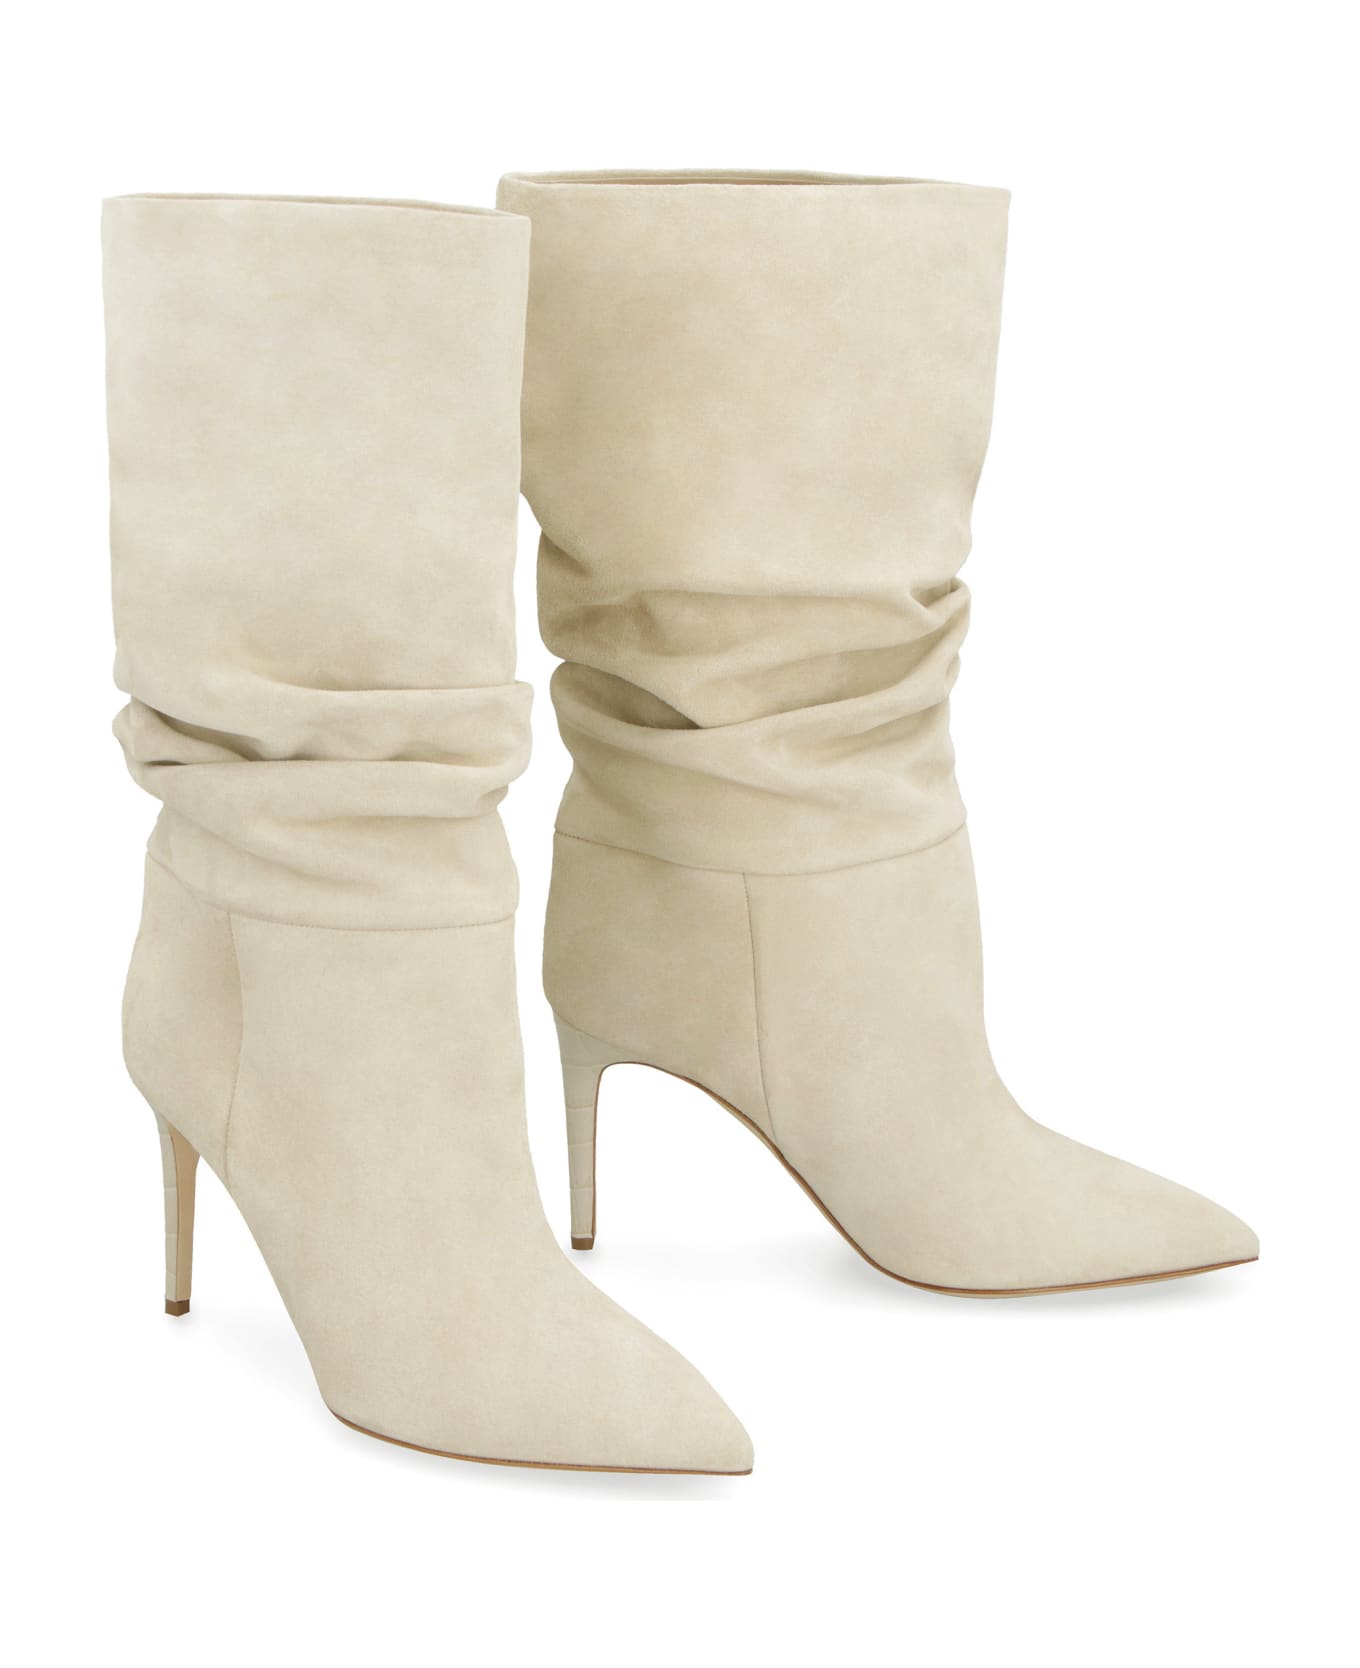 Paris Texas Slouchy Suede Knee High Boots - Ivory